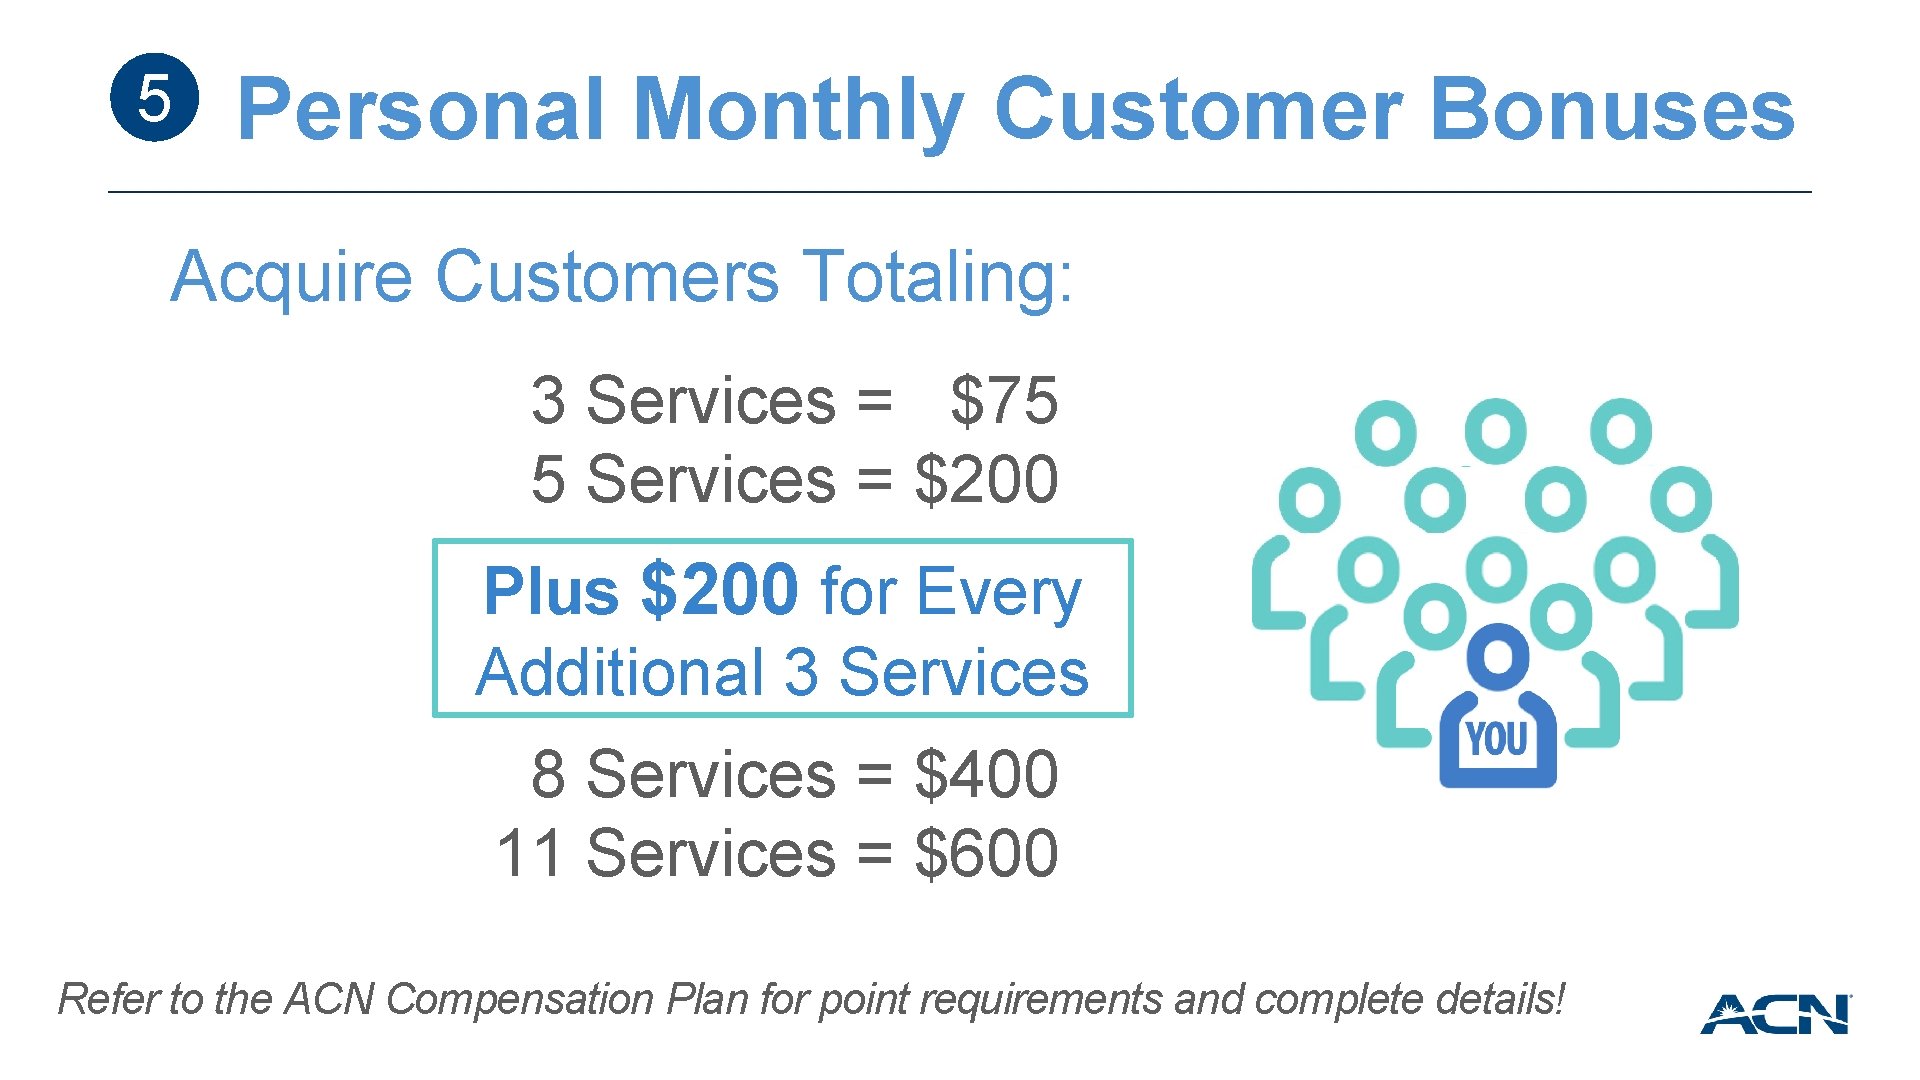 5 Personal Monthly Customer Bonuses Acquire Customers Totaling: 3 Services = $75 5 Services